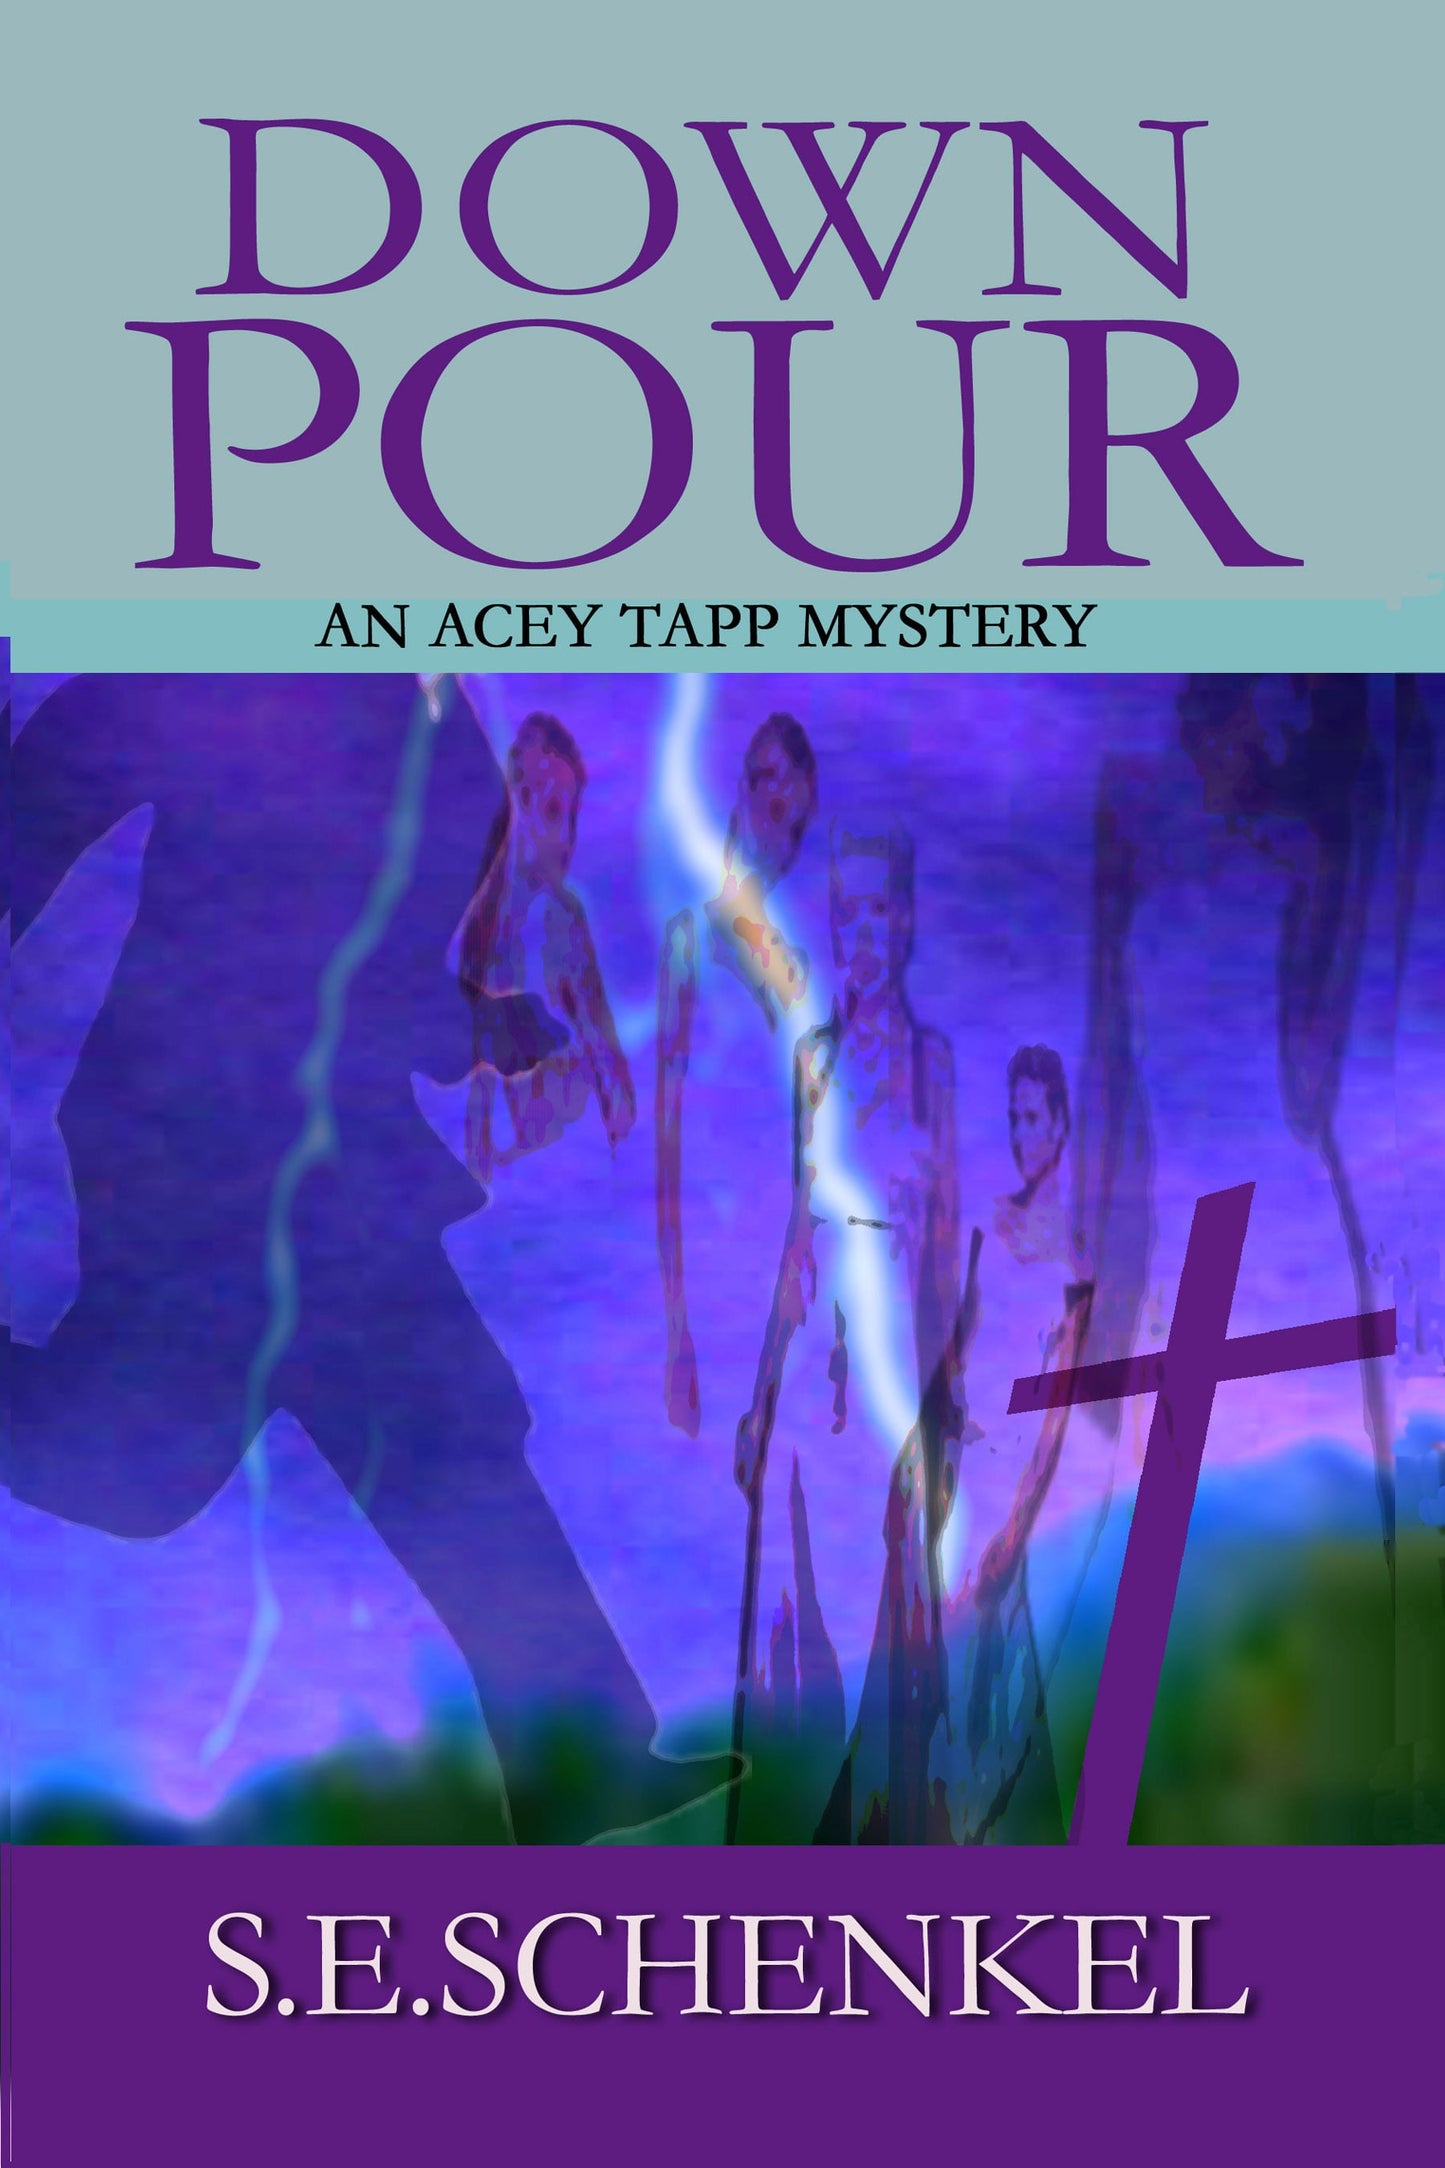 Downpour: An Acey Tapp Mystery